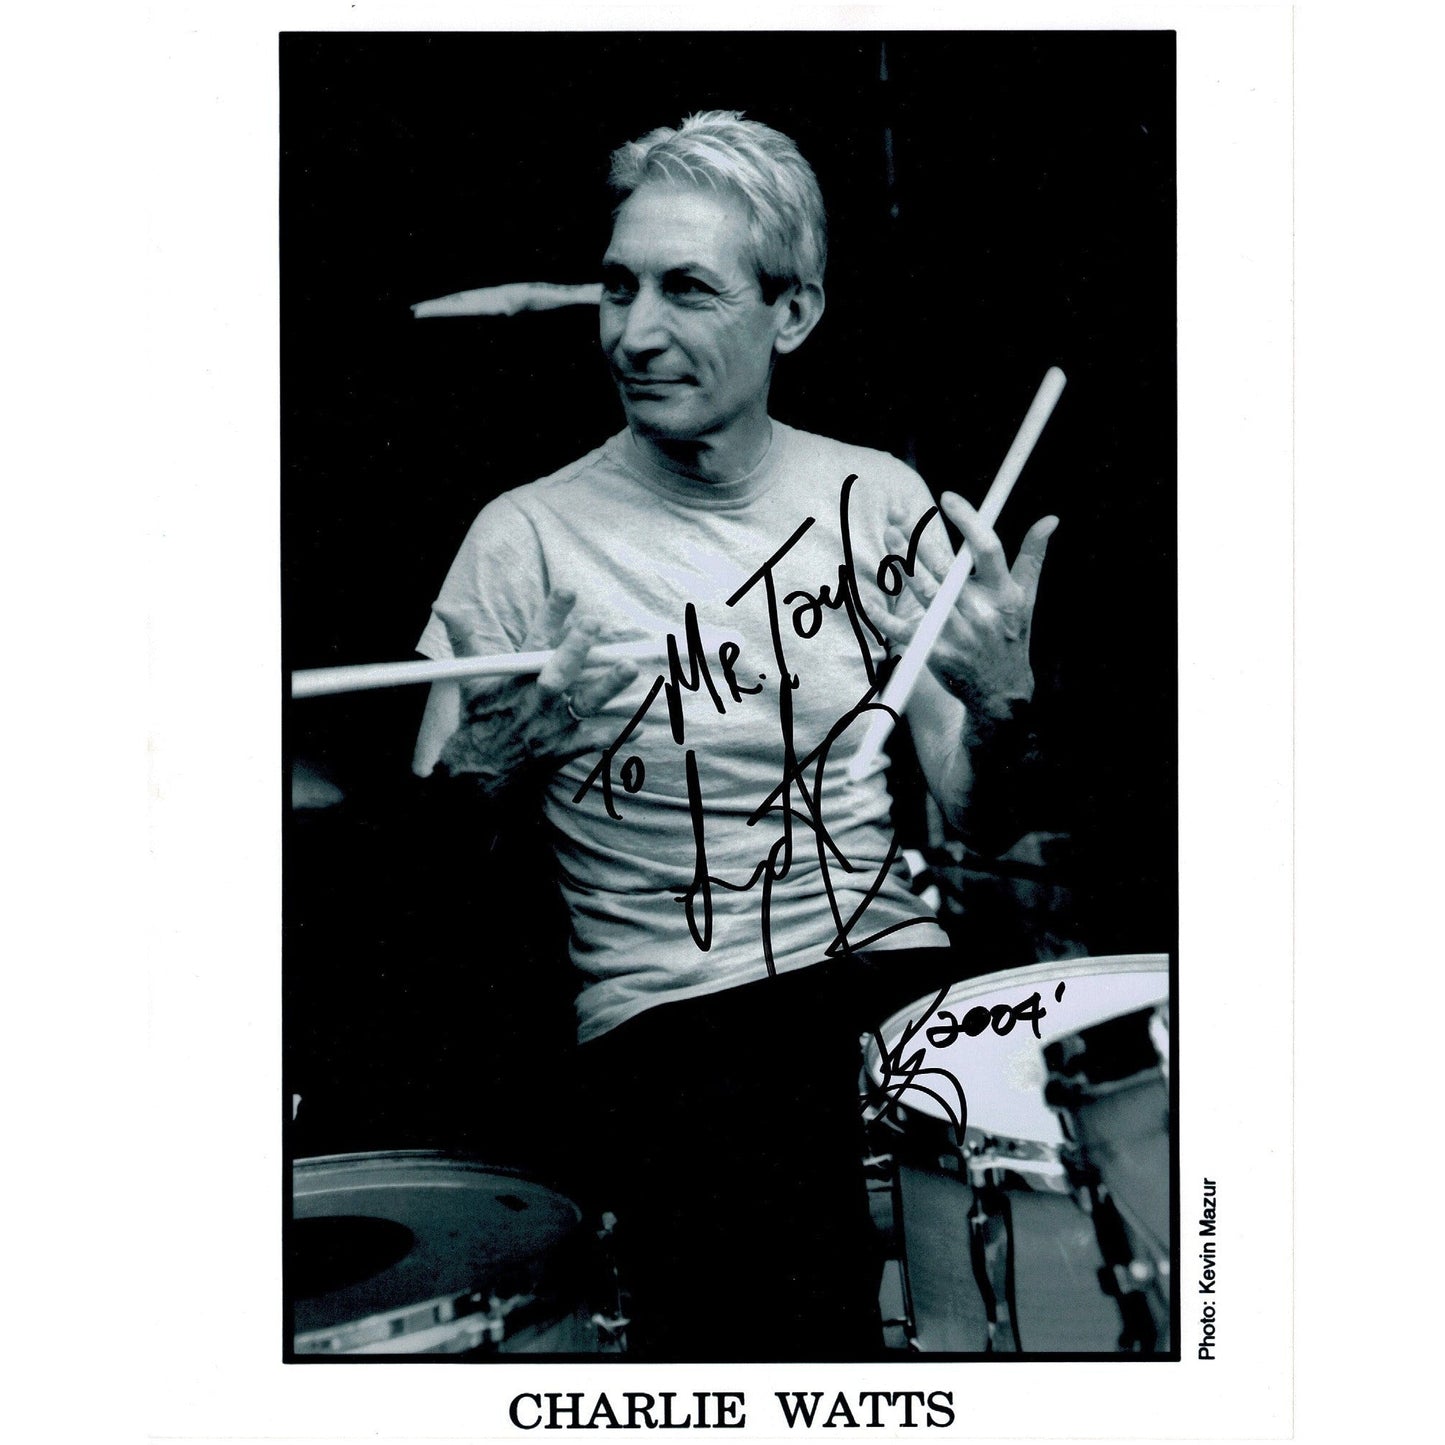 Charlie Watts 10" x 8" signed photograph and used drumstick - The Memorabilia Club